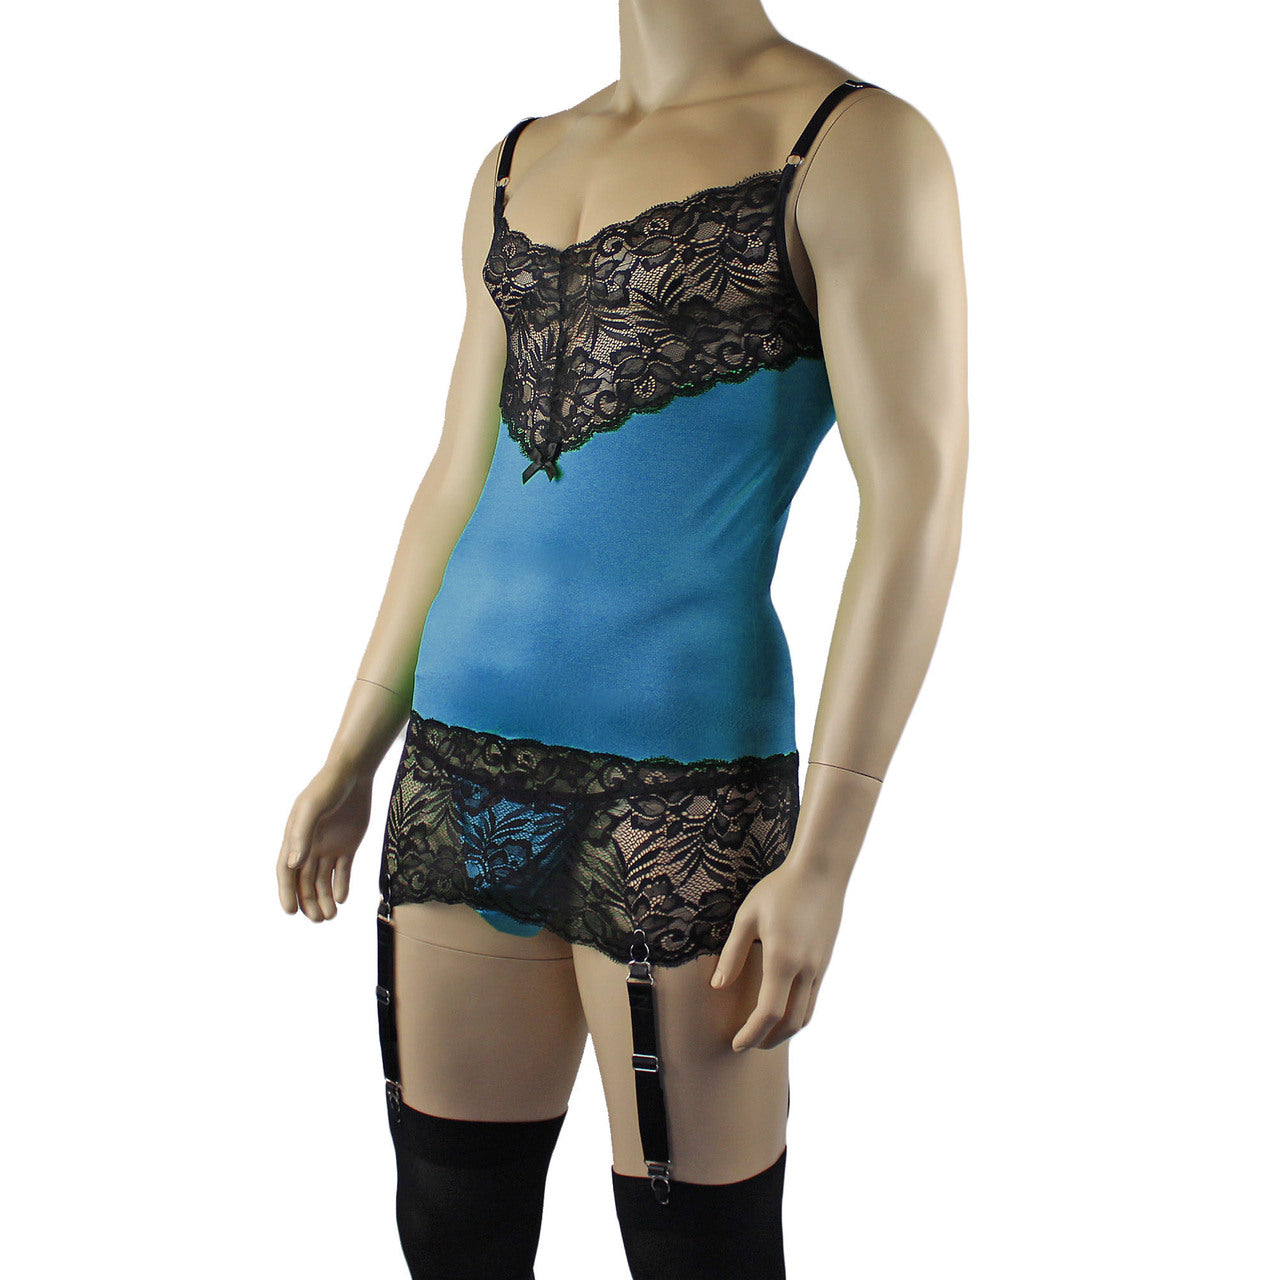 Mens Risque Camisole Mini Dress Chemise, G string & Stockings (teal black plus other colours)